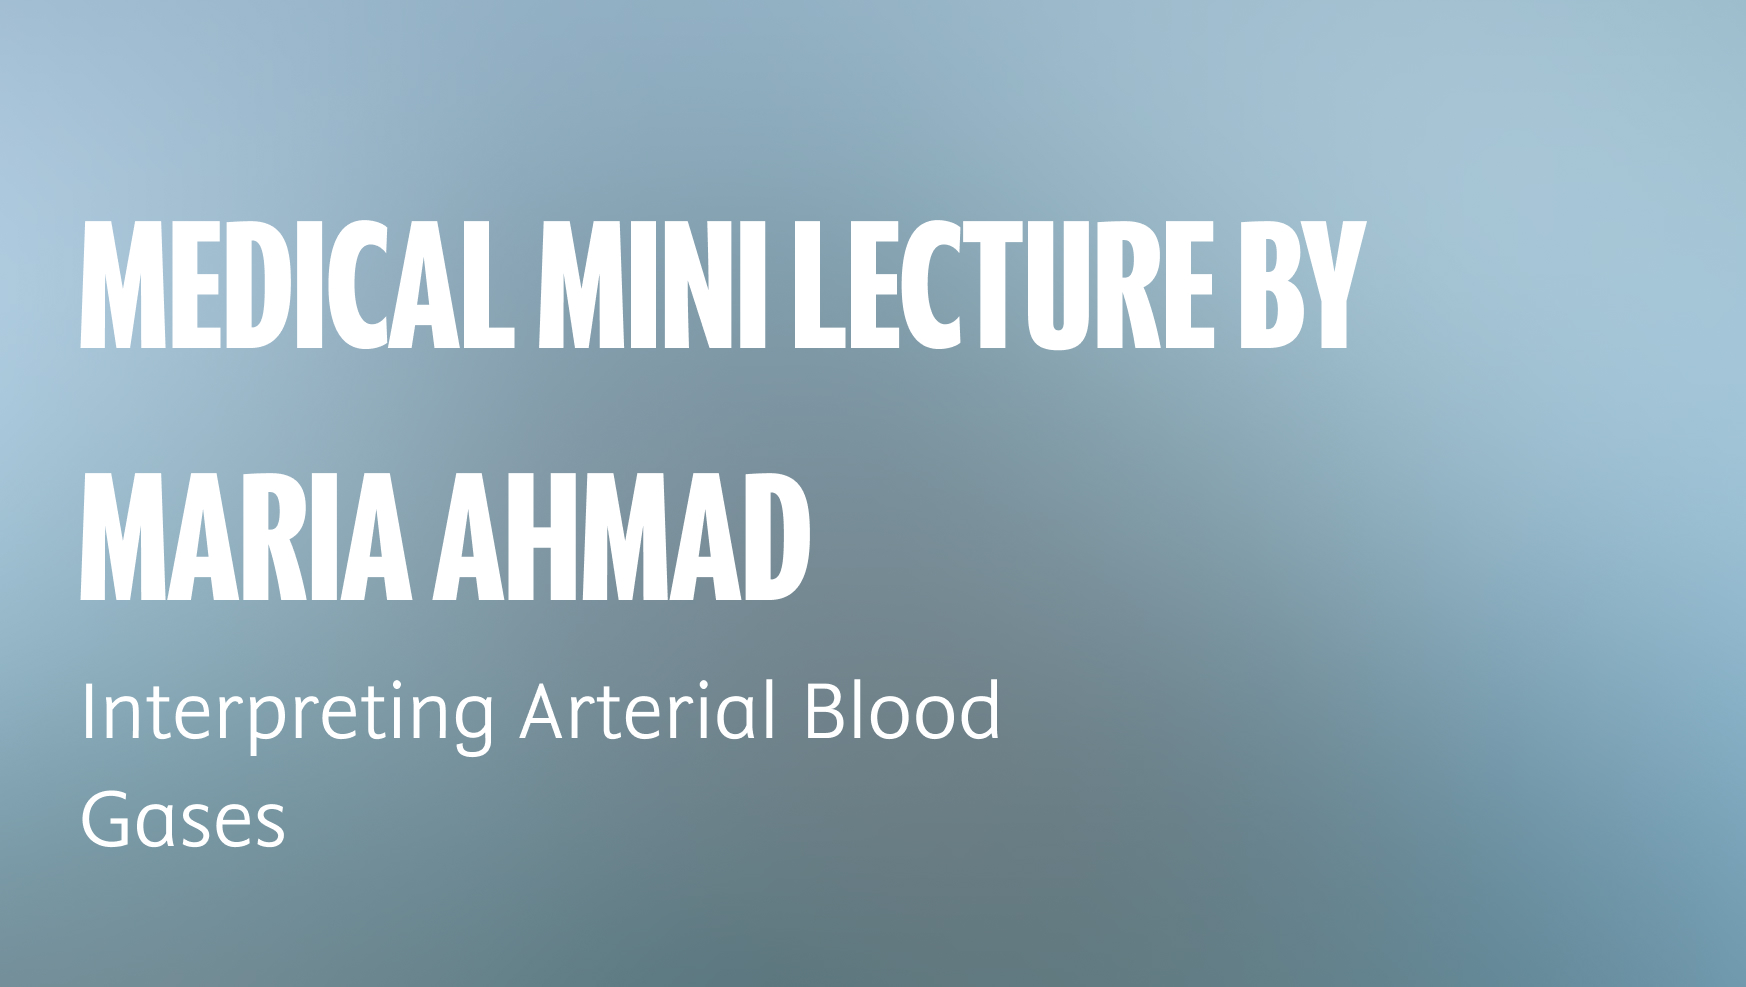 Medical mini lecture by Maria Ahmad on Interpreting Arterial Blood Gases